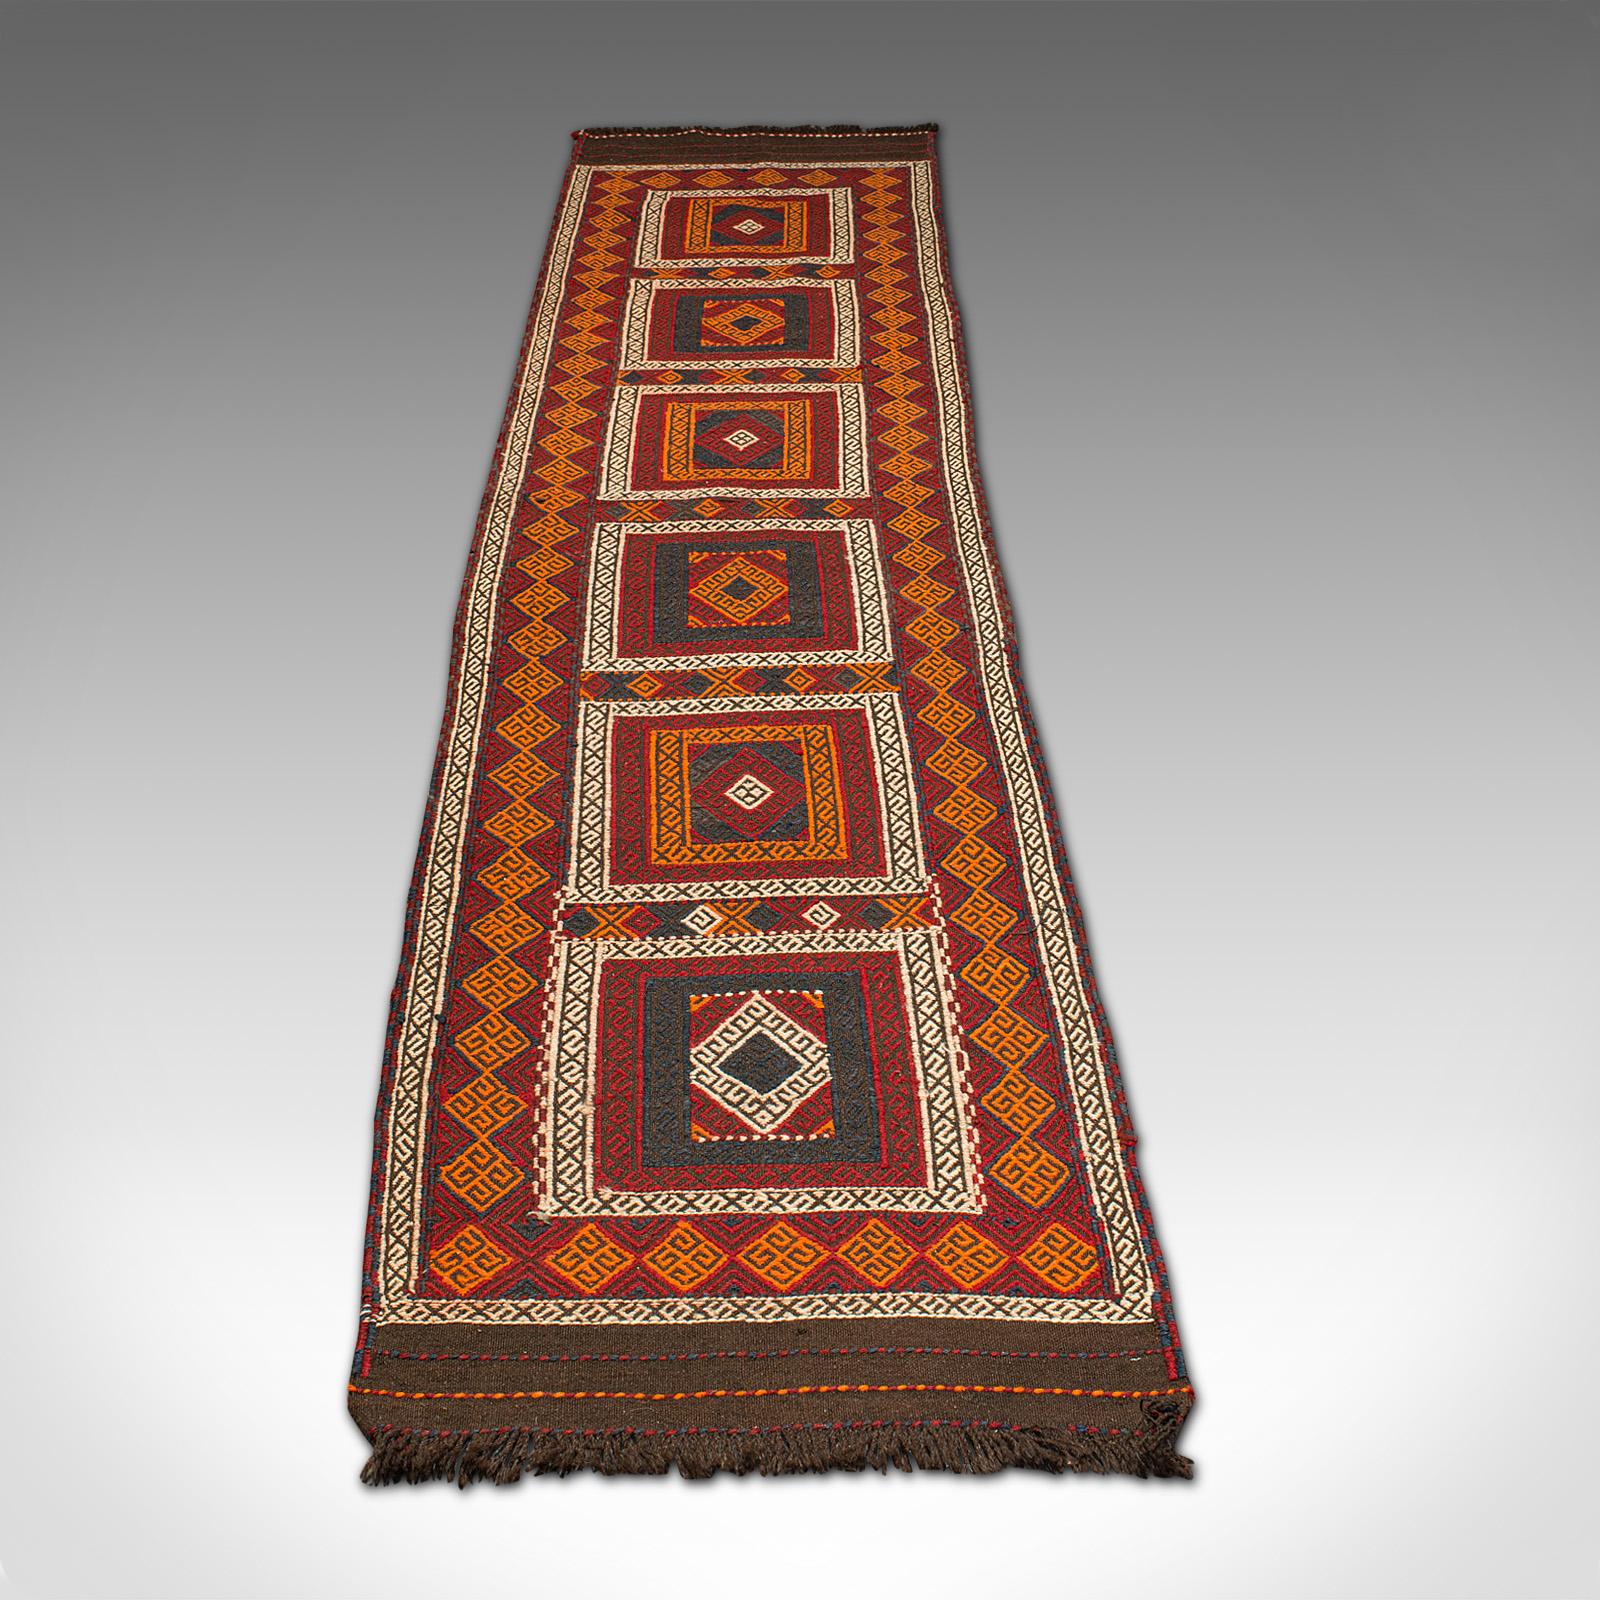 This is a long vintage Suzani Kilim runner. A Caucasian, woven hallway or entrance hall carpet, dating to the late 20th century, circa 1980.

Impressively long in size for the larger hallway at 74cm x 344cm (29.25